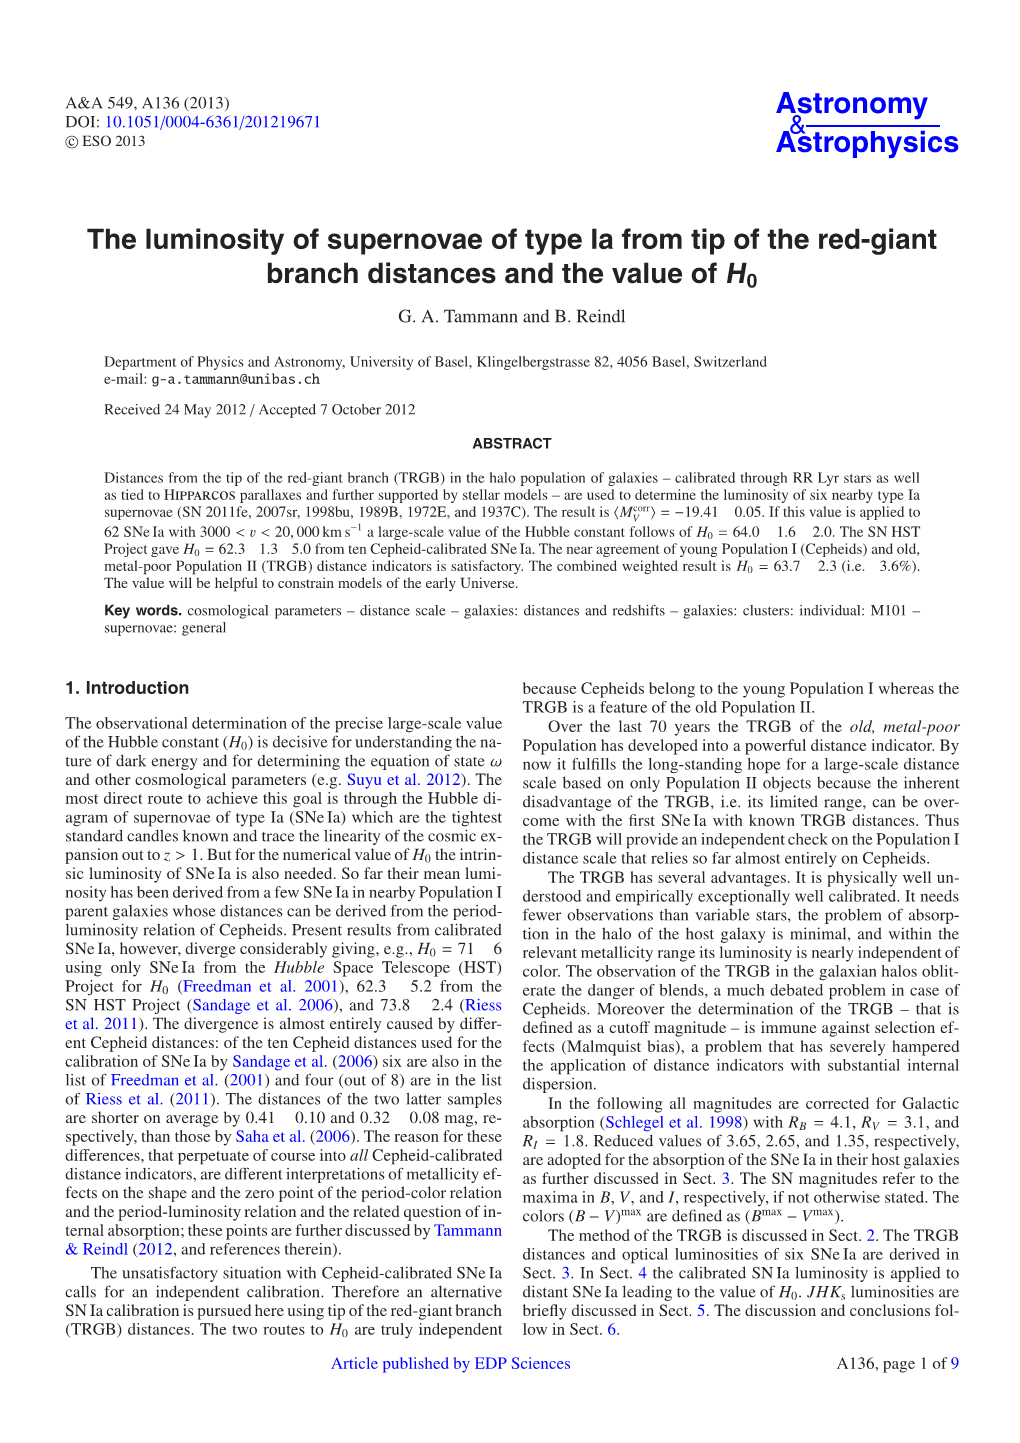 The Luminosity of Supernovae of Type Ia from Tip of the Red-Giant Branch Distances and the Value of H0 G